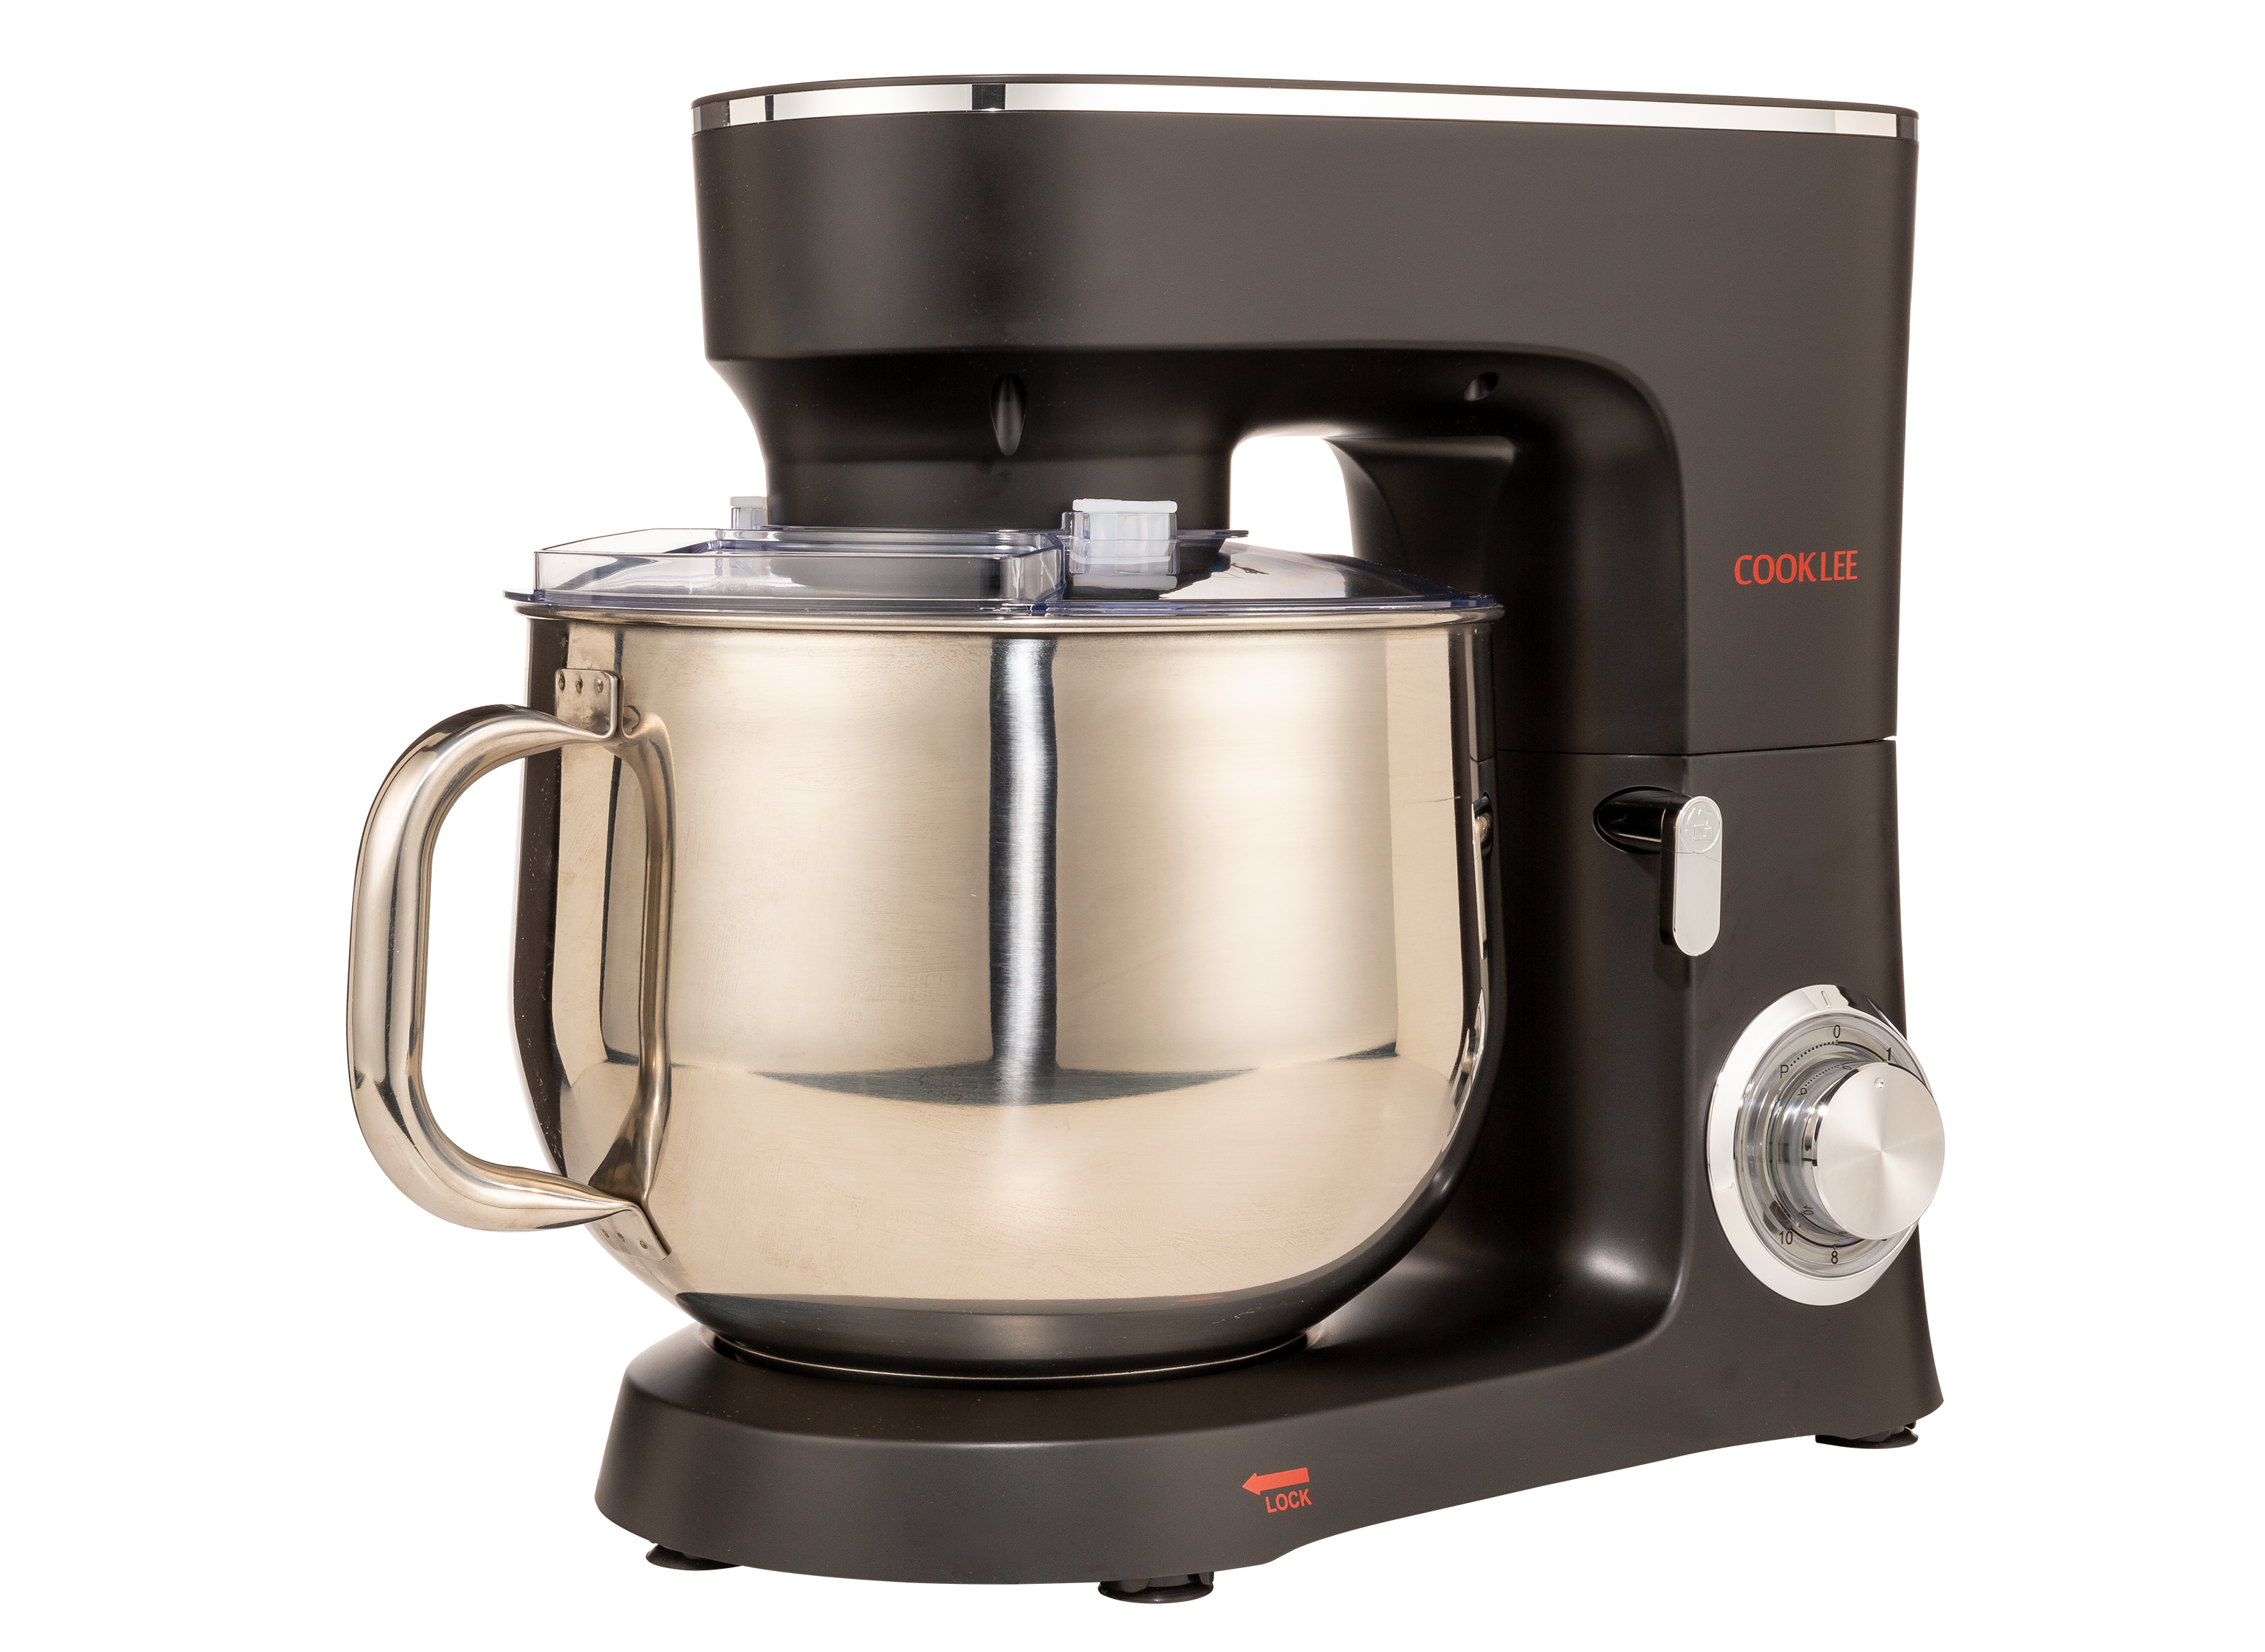 https://crdms.images.consumerreports.org/prod/products/cr/models/406953-stand-mixers-cooklee-sm-1551-10031888.png